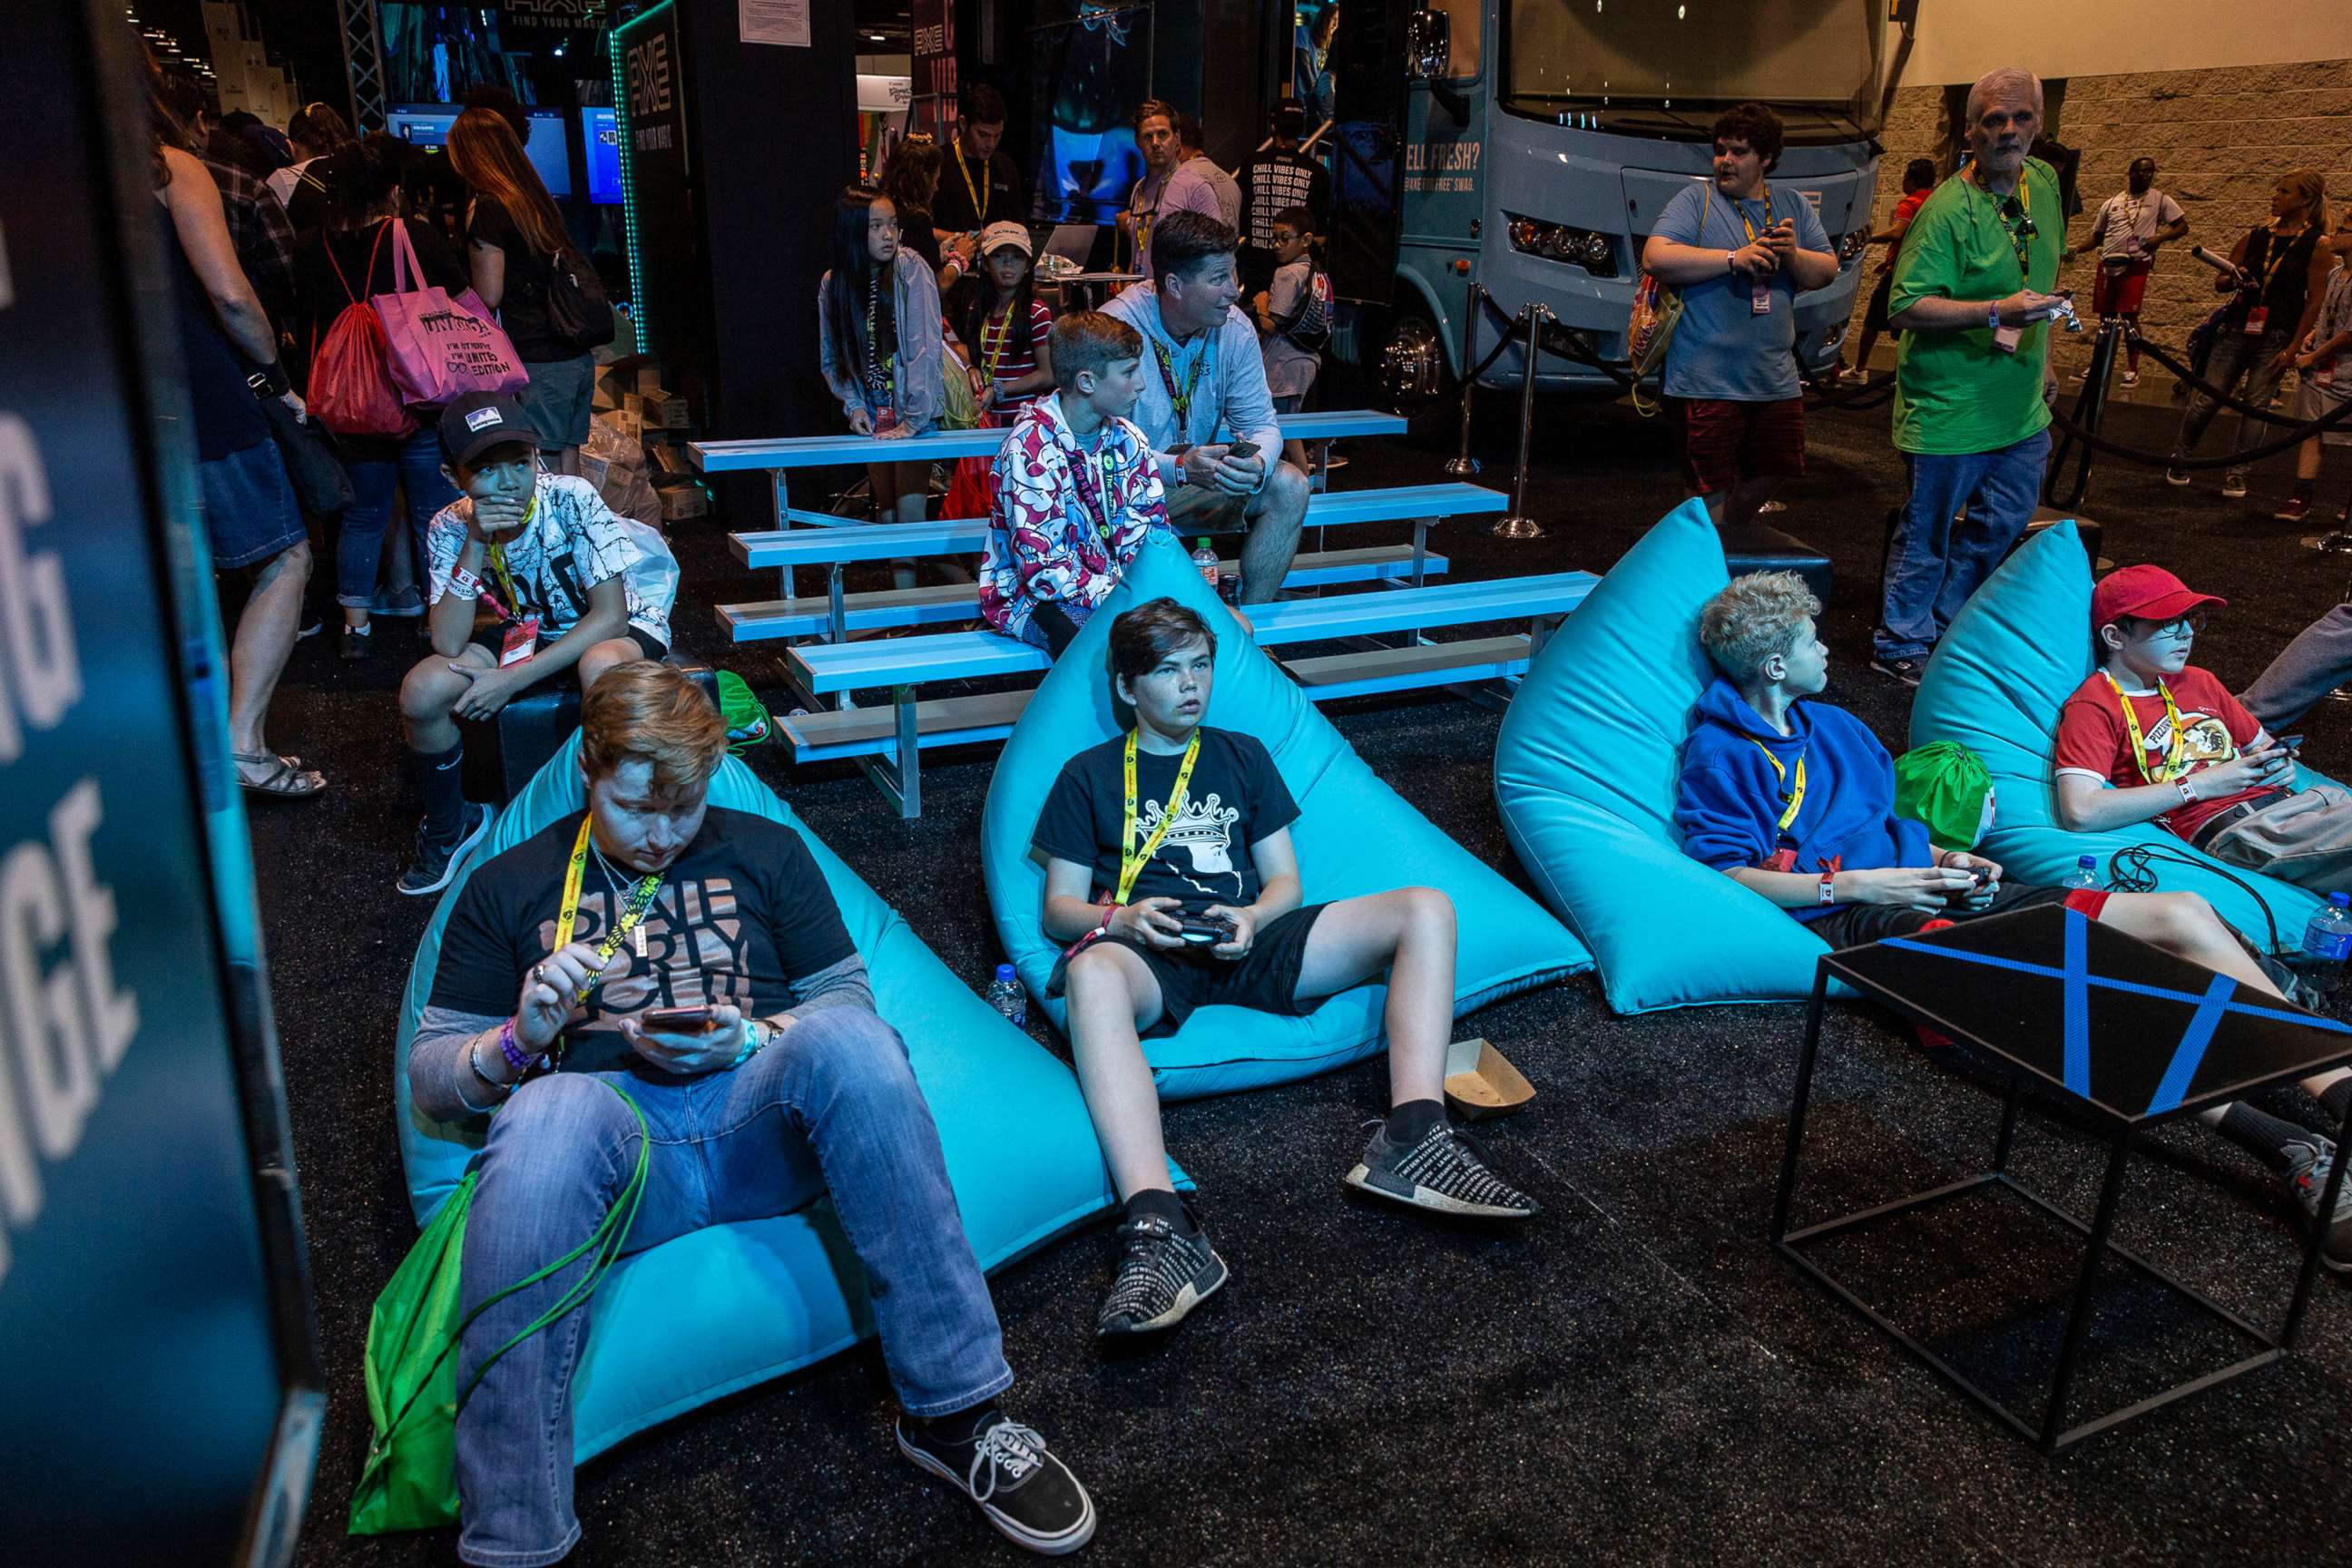 PHOTO: Attendees play video games at the Axe booth at VidCon in Anaheim, Calif., July 11, 2019. 